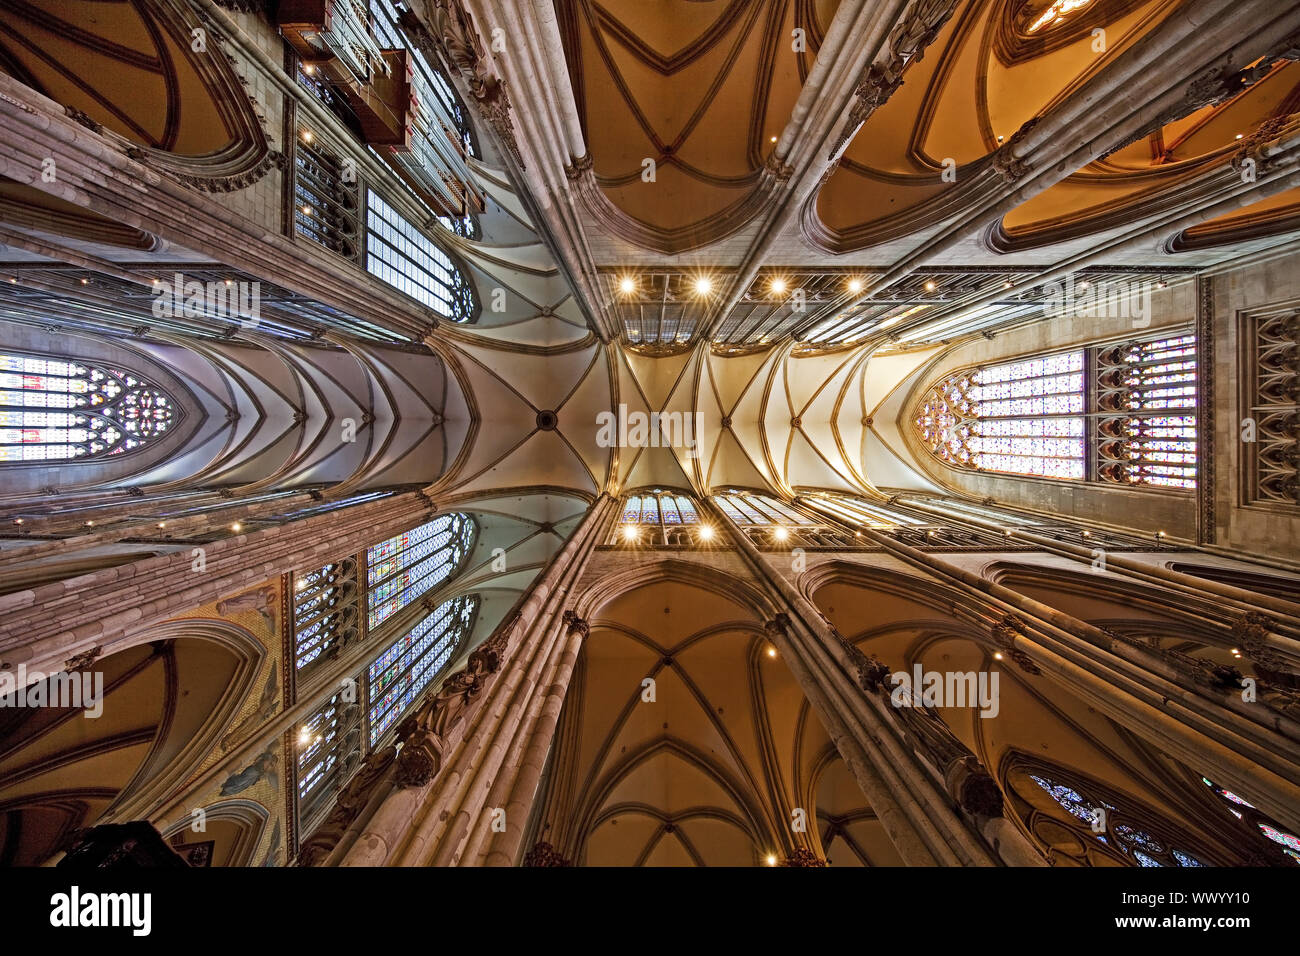 Arched ceiling, longhouse, Cologne Cathedral, interior view, Cologne, Germany, Europe Stock Photo